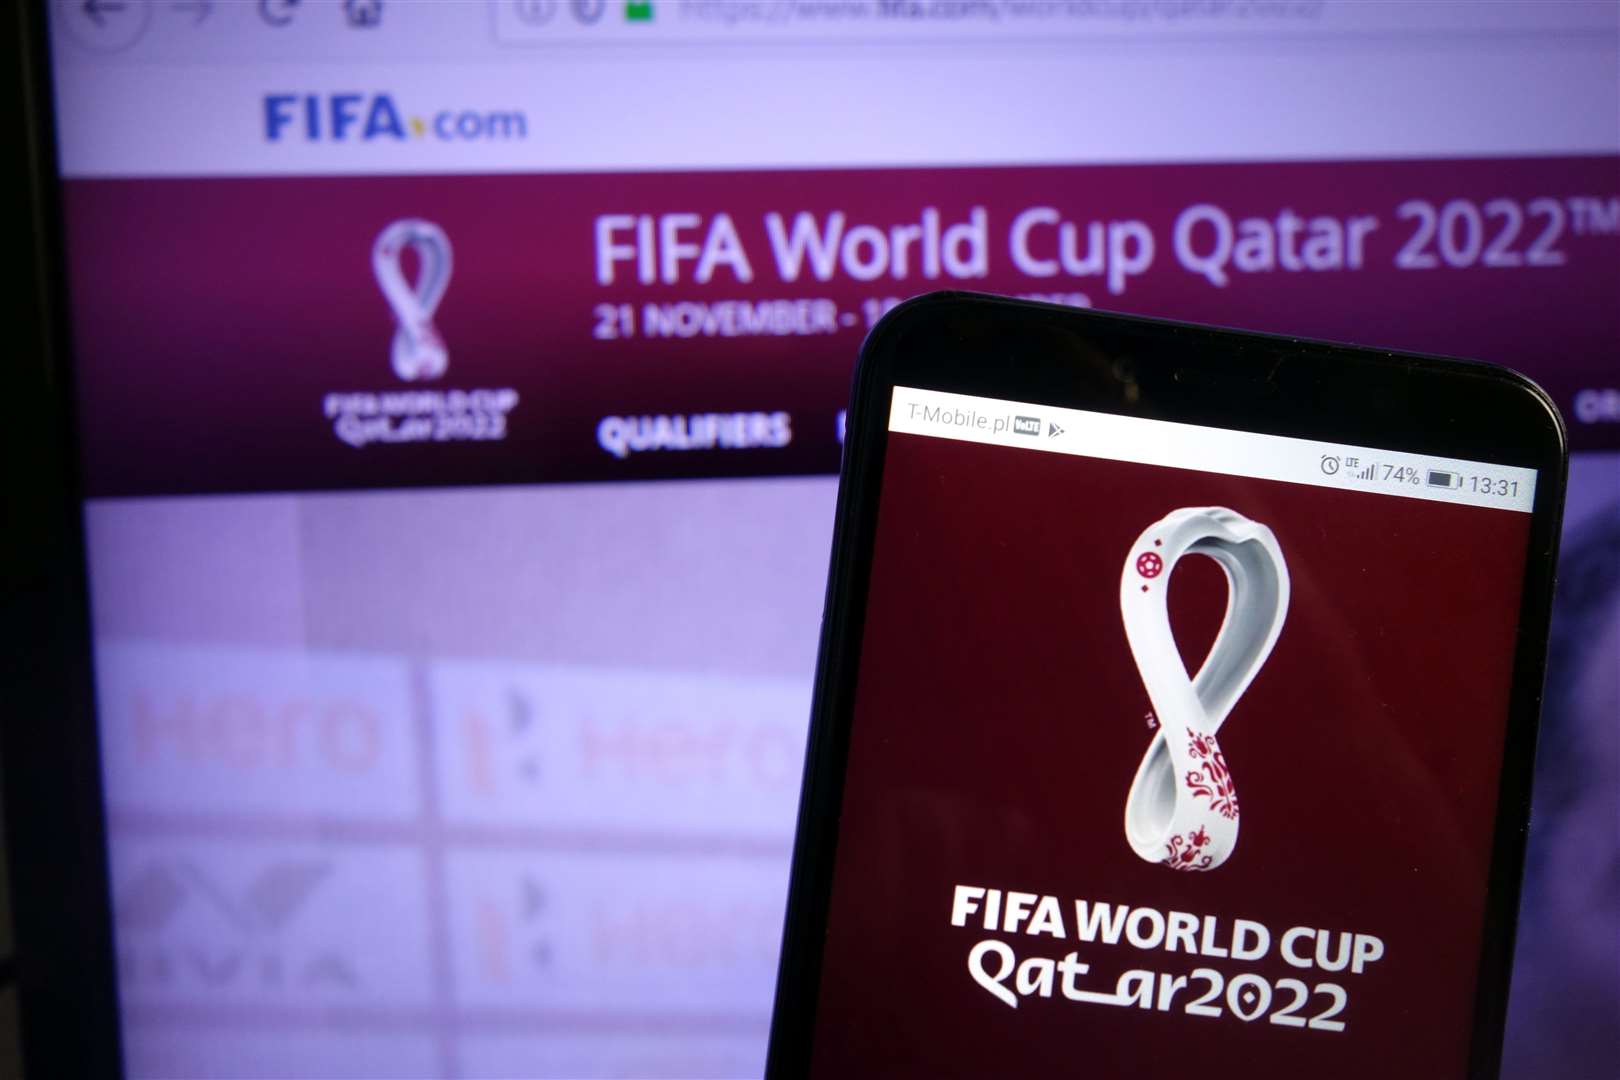 World Cup is due to take place in Qatar next year